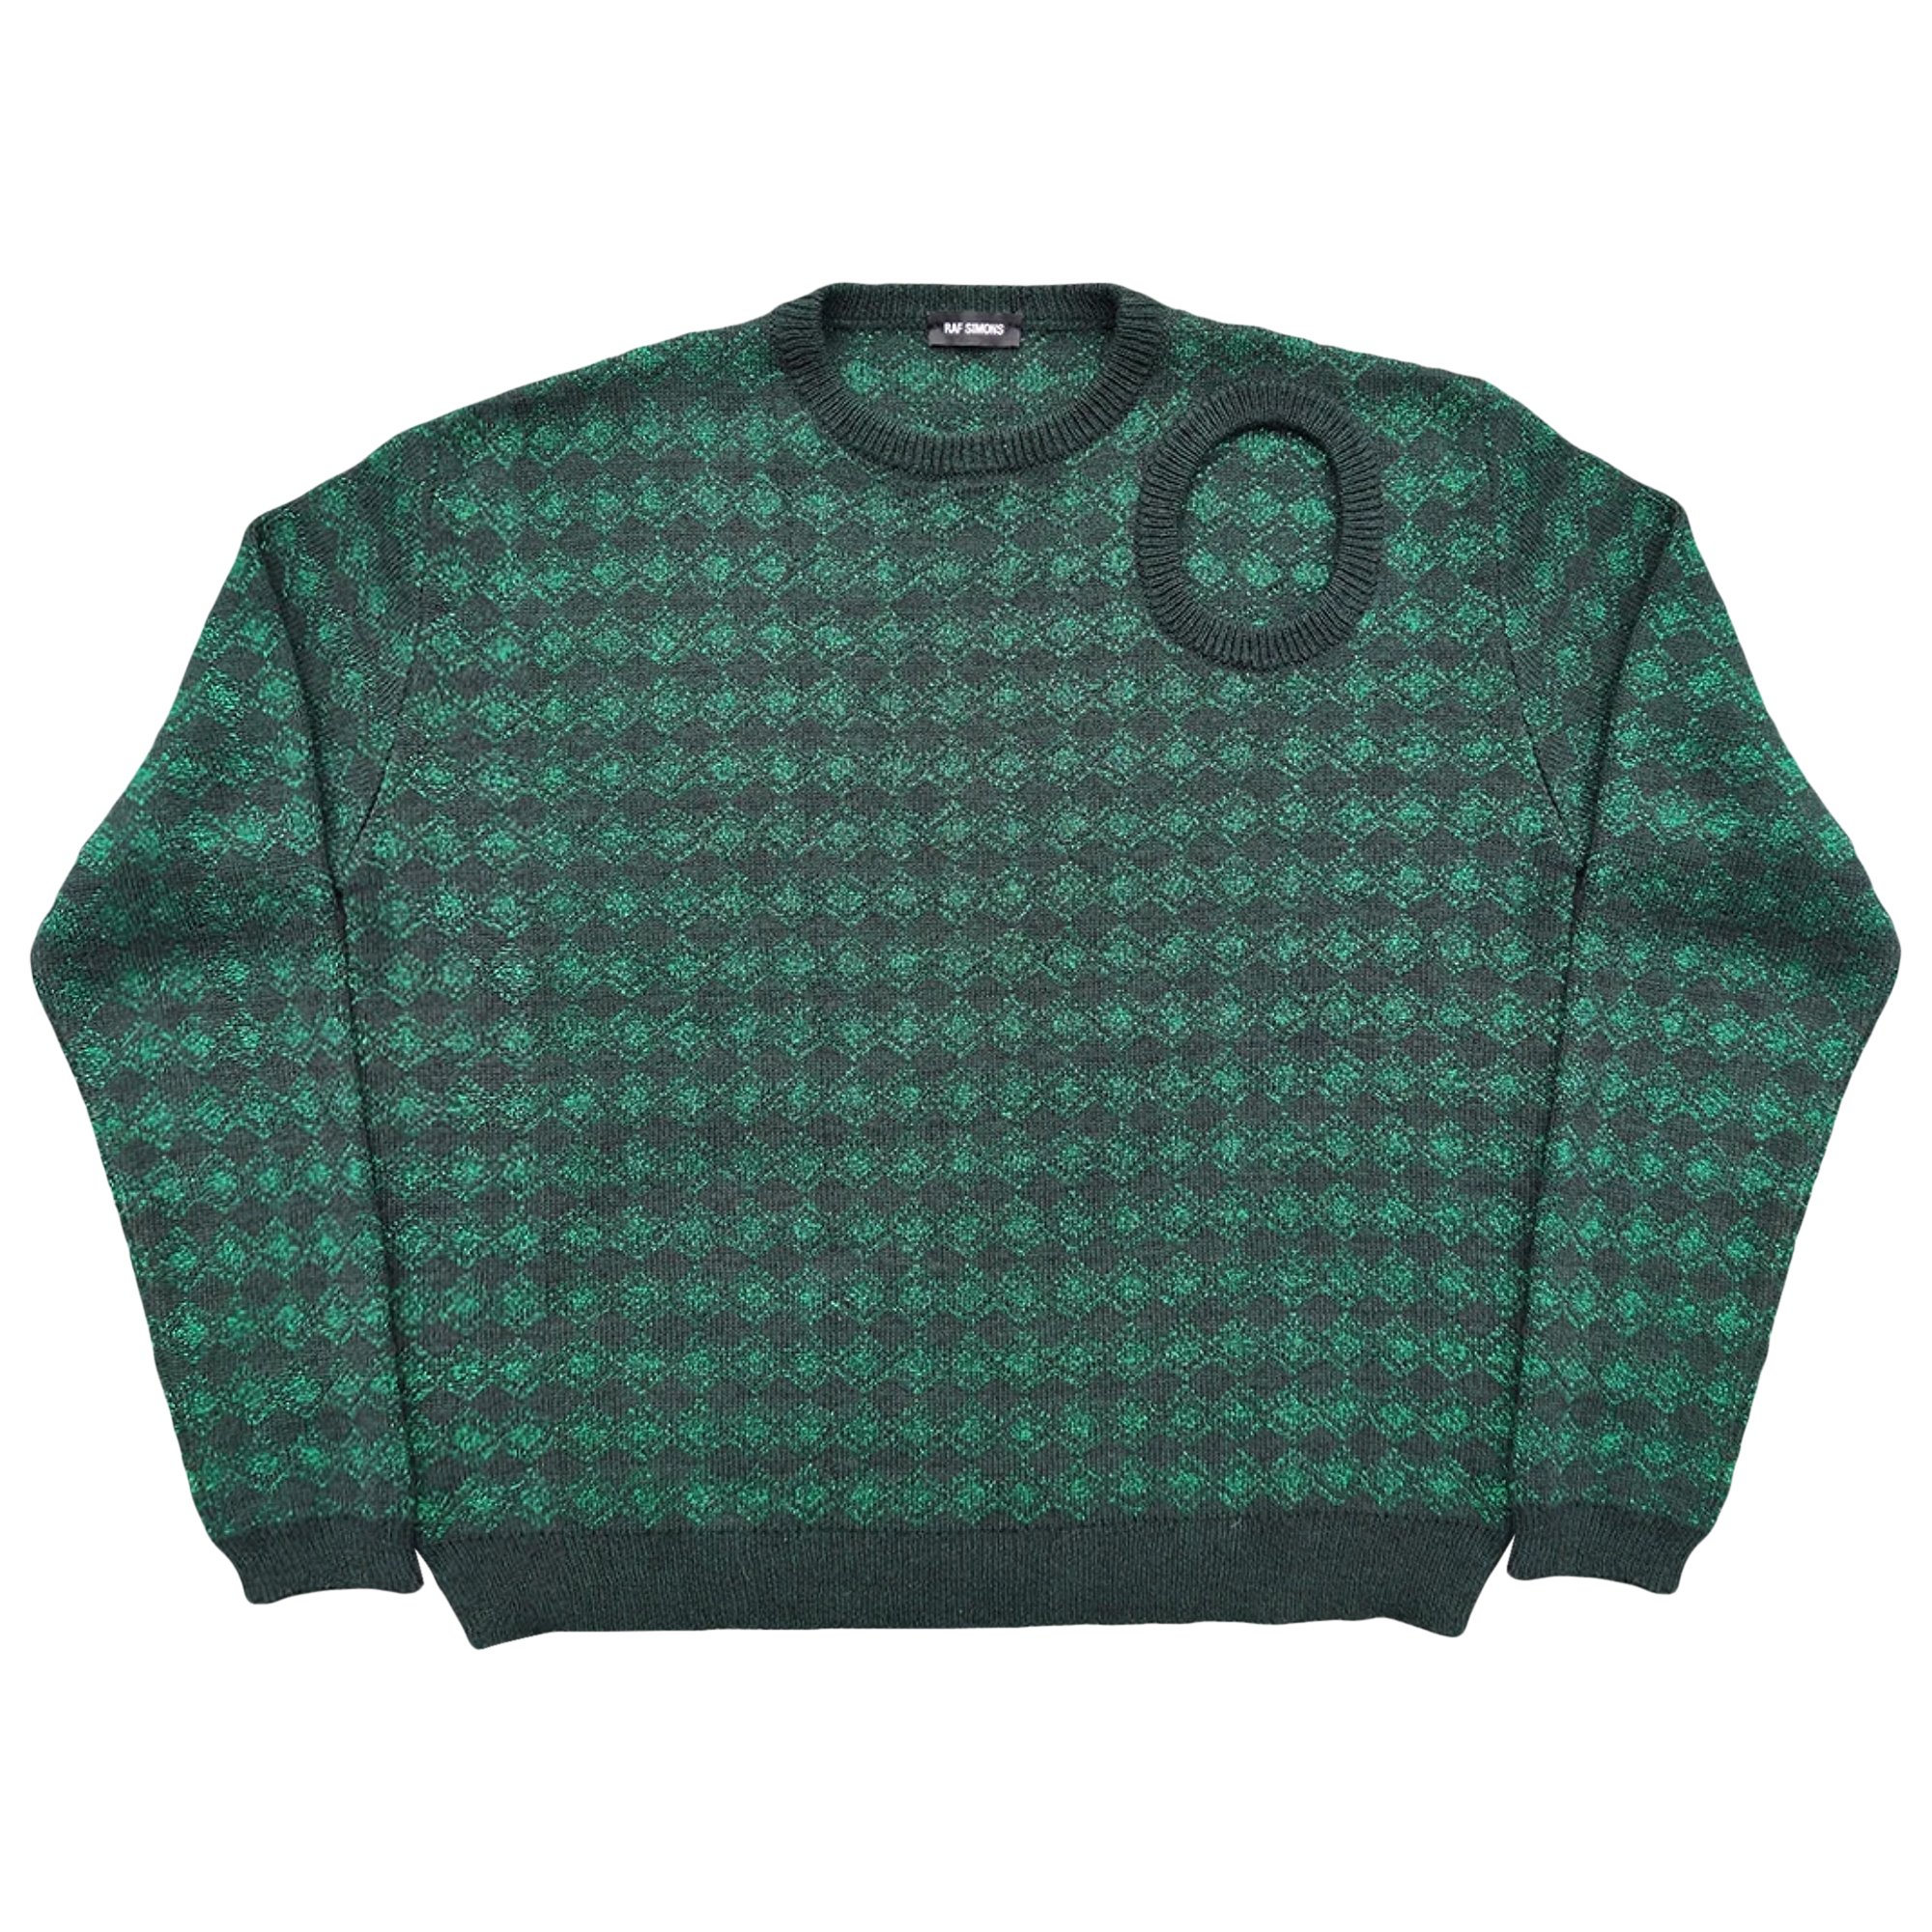 Buy Raf Simons Cut Out Hole Sweater 'Green' - 0459 1SS190105CUHS 